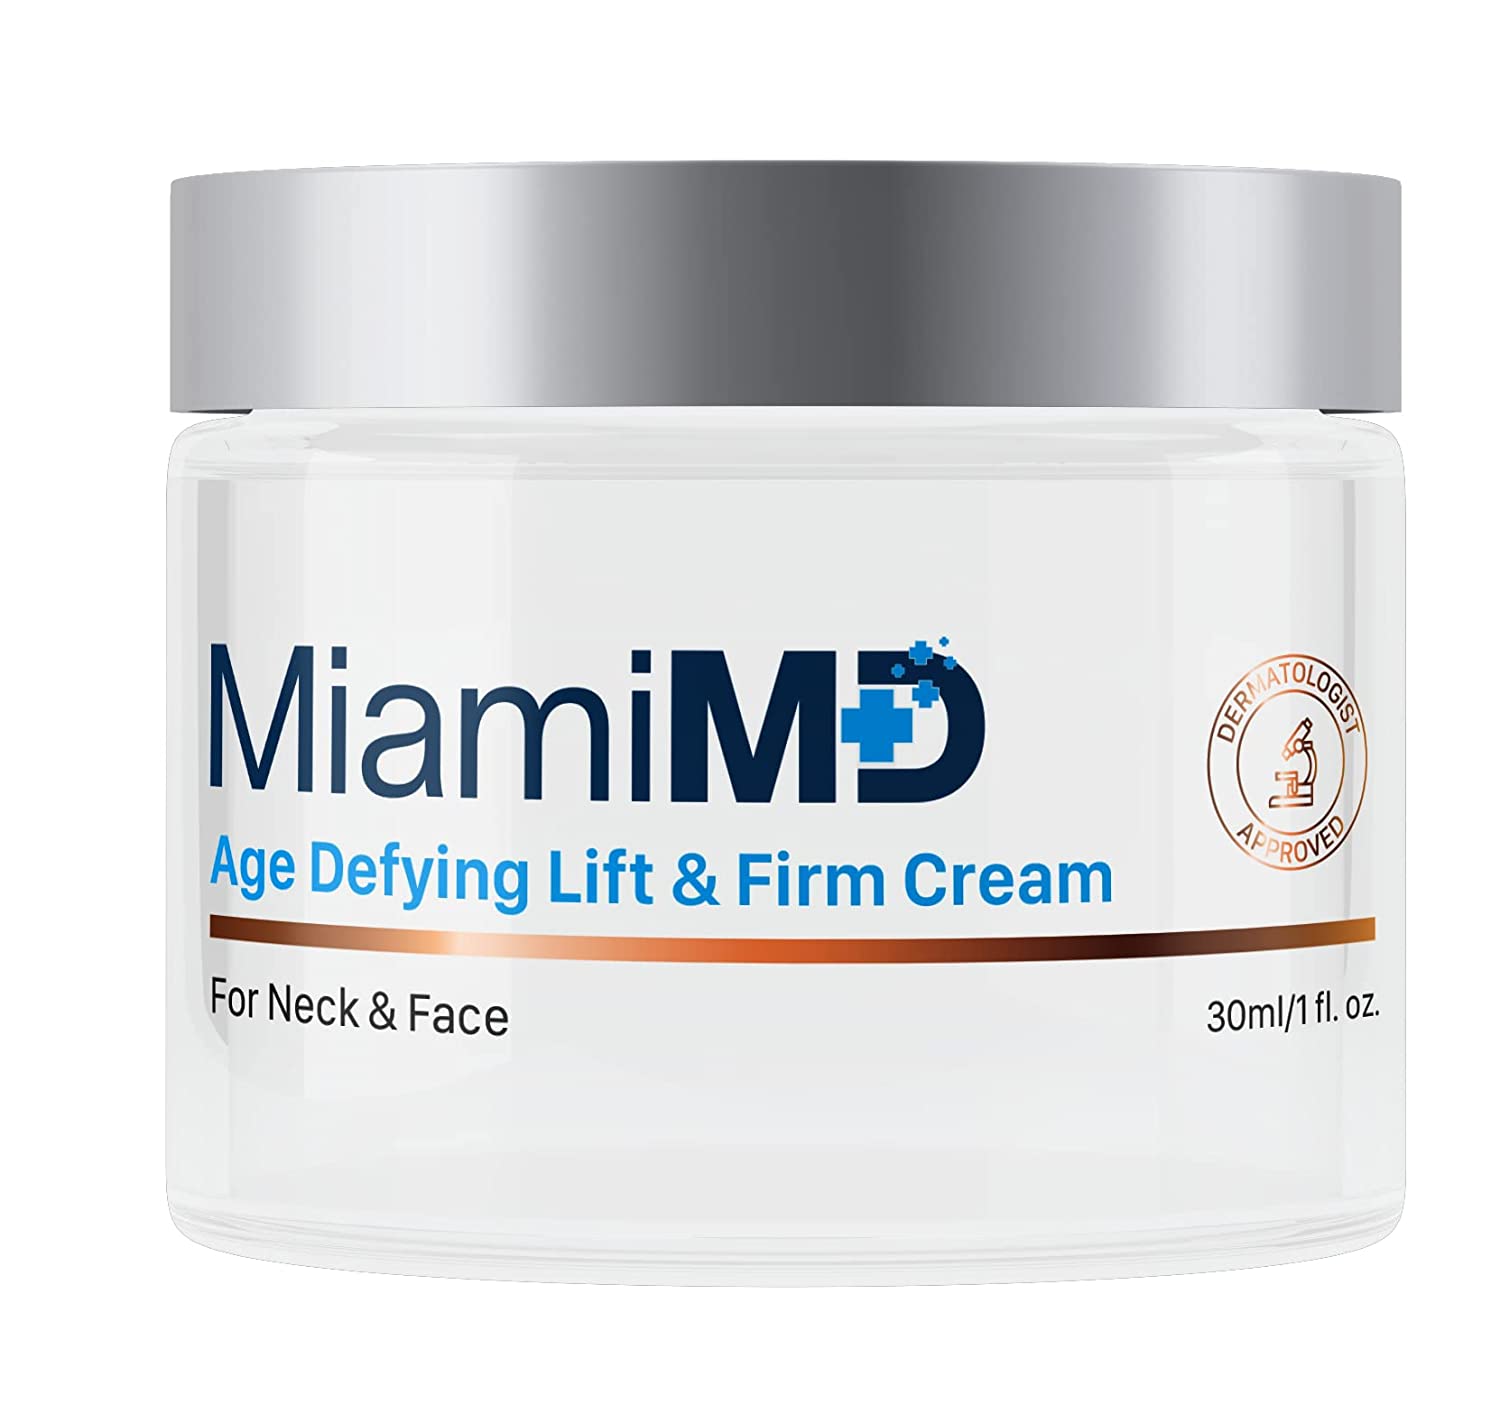 MiamiMD Lift & Firm Cream Review